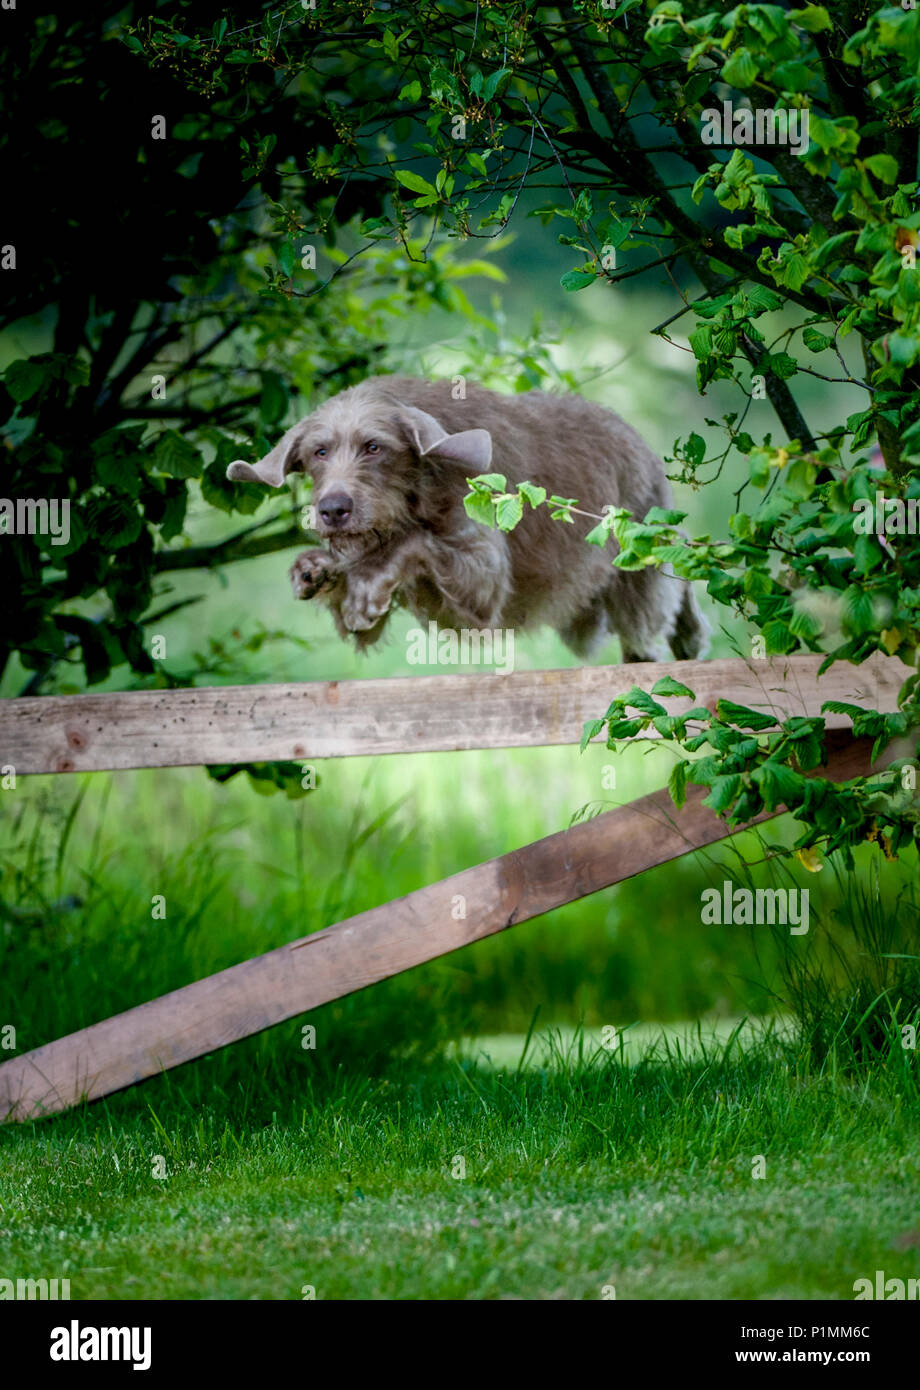 A Slovakian Rough Haired Pointer dog jumping a rail fence, during a dog training class on a summers afternoon Stock Photo